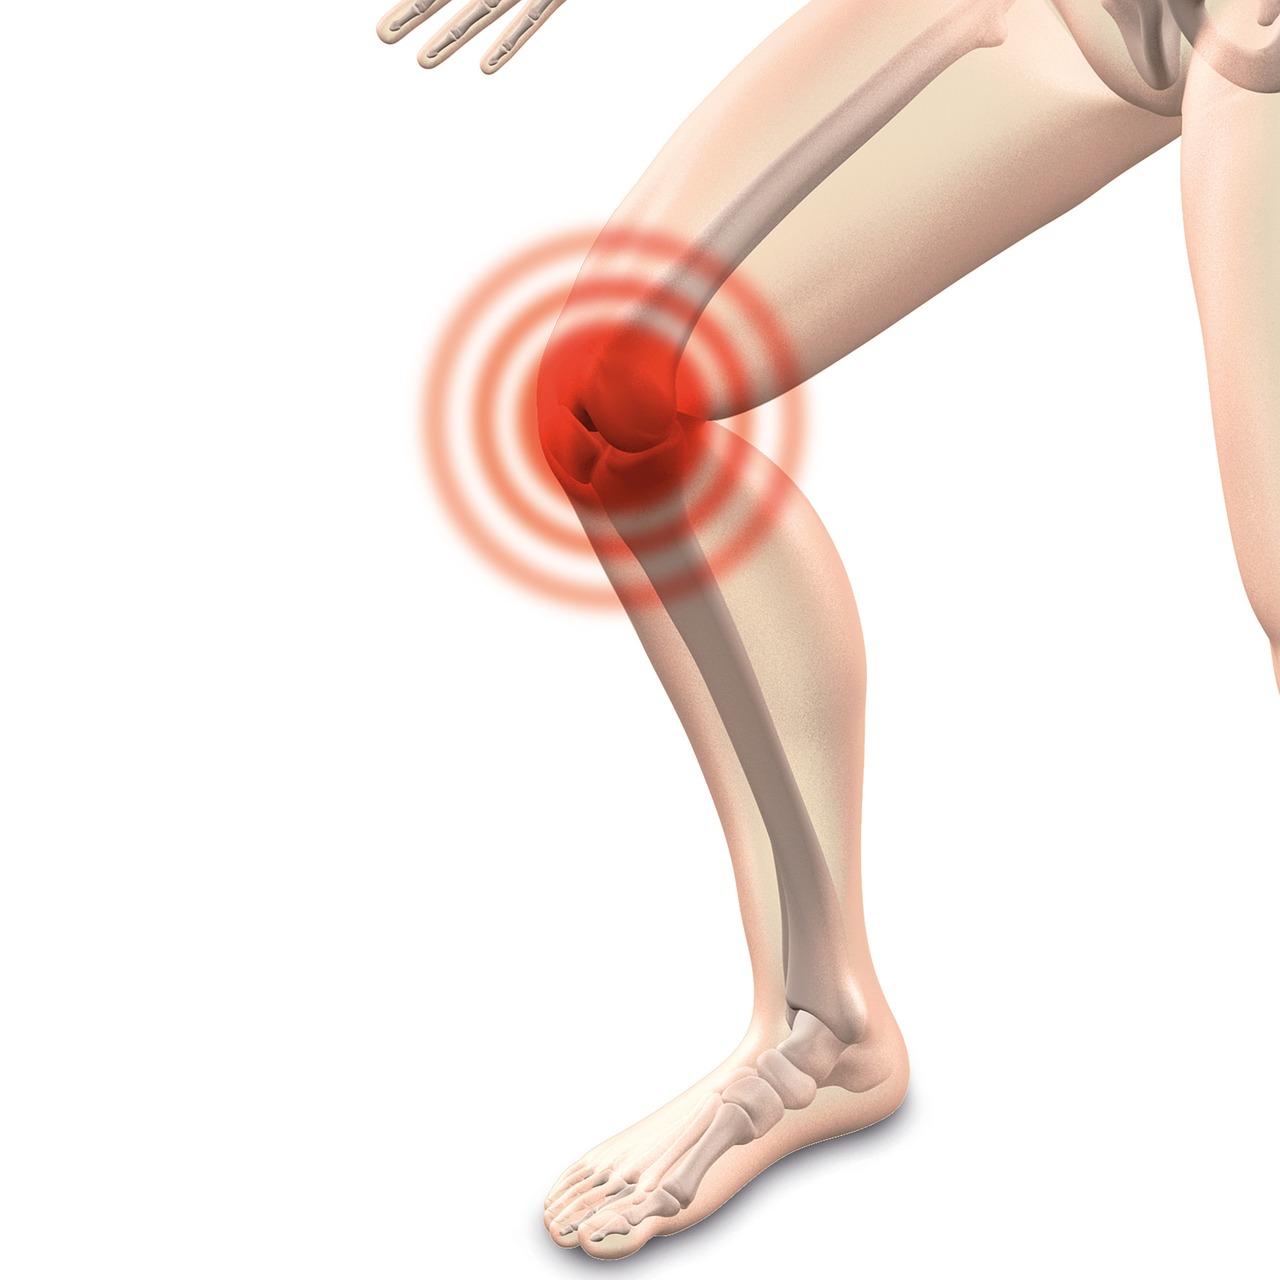 The 3d Technology That Could Revolutionize The Treatment Of Osteoarthritis Of The Knee